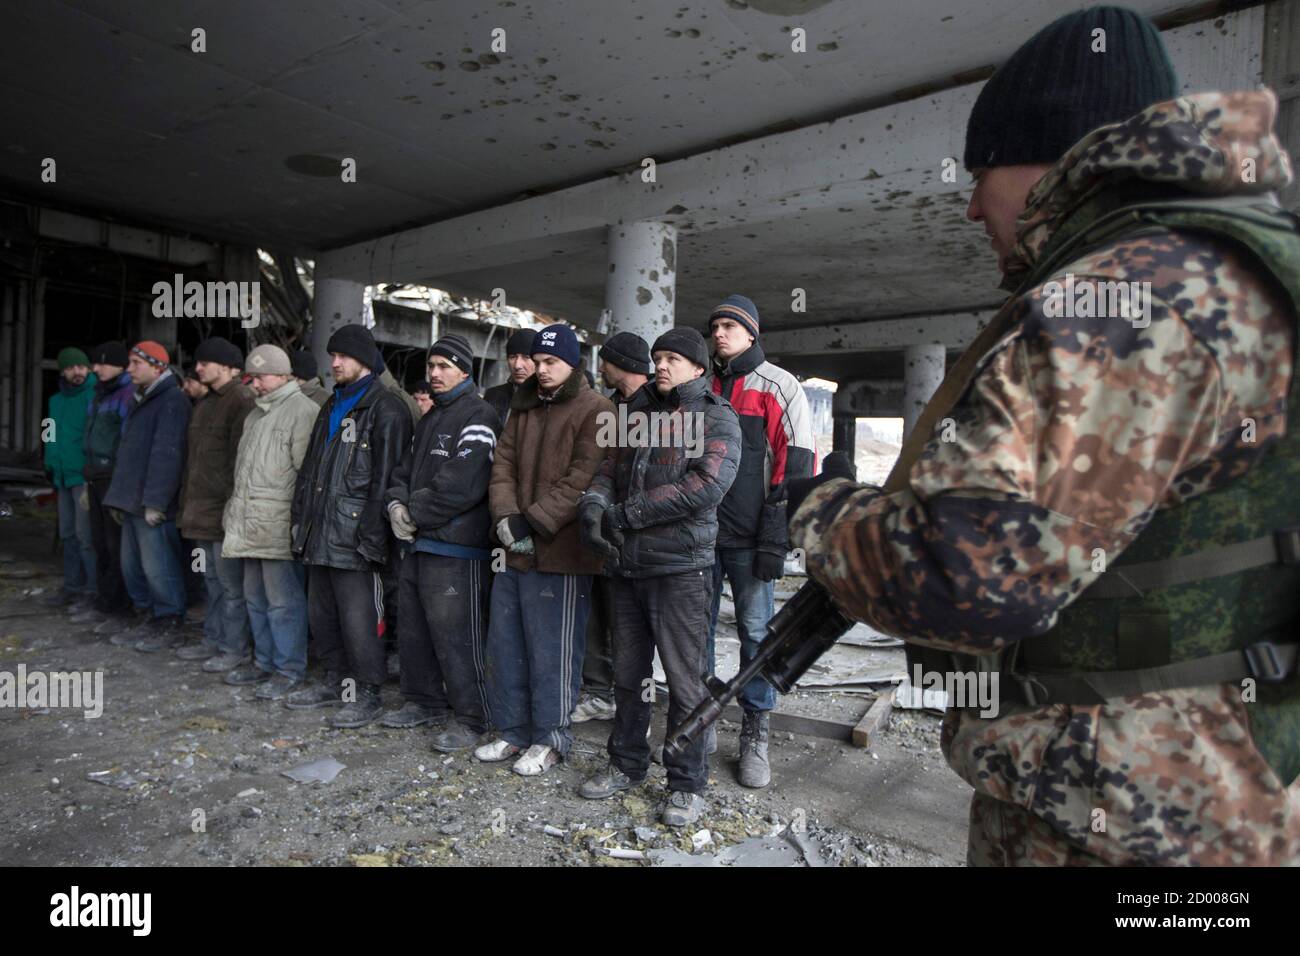 An armed man of the separatist self-proclaimed Donetsk People's Republic army (R) guards Ukrainian war prisoners in the damaged Donetsk airport , February 26, 2015.  REUTERS/Baz Ratner (UKRAINE - Tags: POLITICS CIVIL UNREST CONFLICT MILITARY) Stock Photo